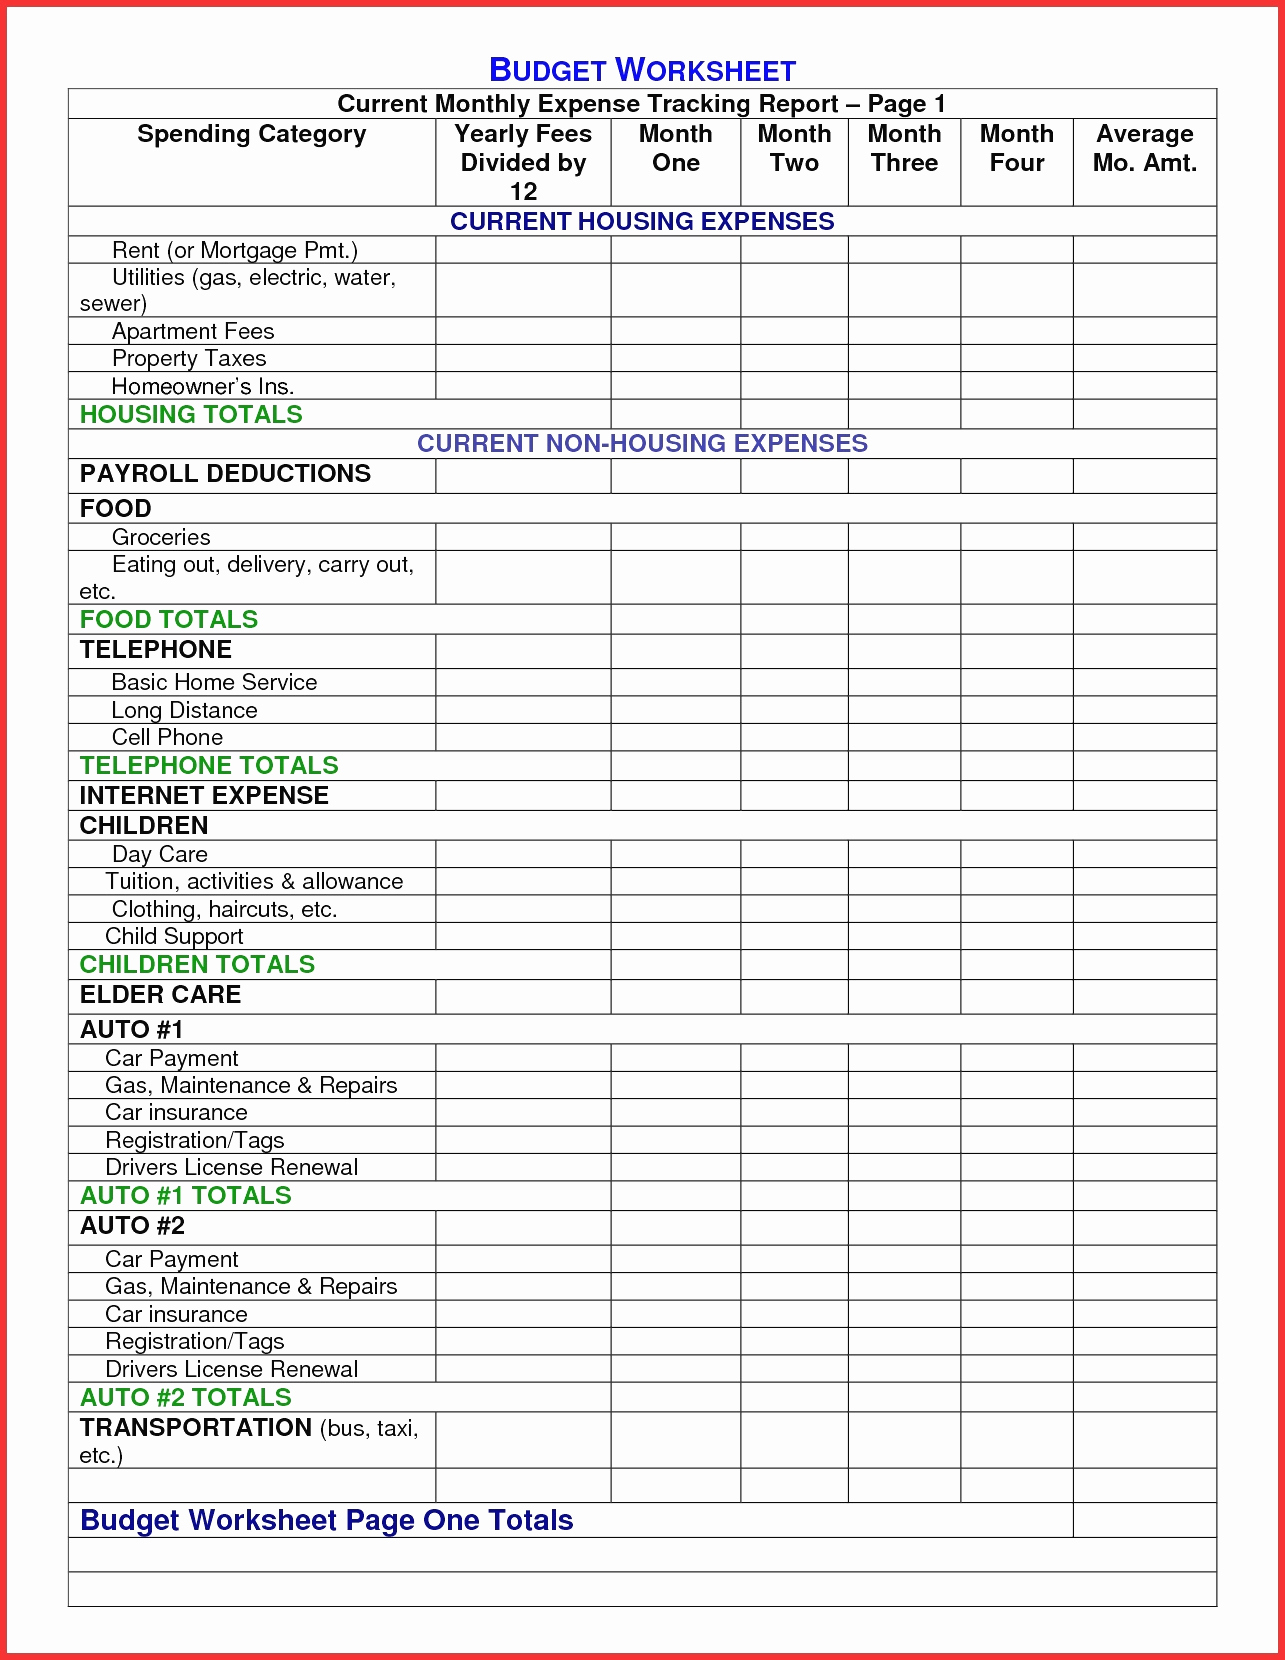 real-estate-expenses-spreadsheet-for-real-estate-agent-expense-tracking-spreadsheet-new-budget